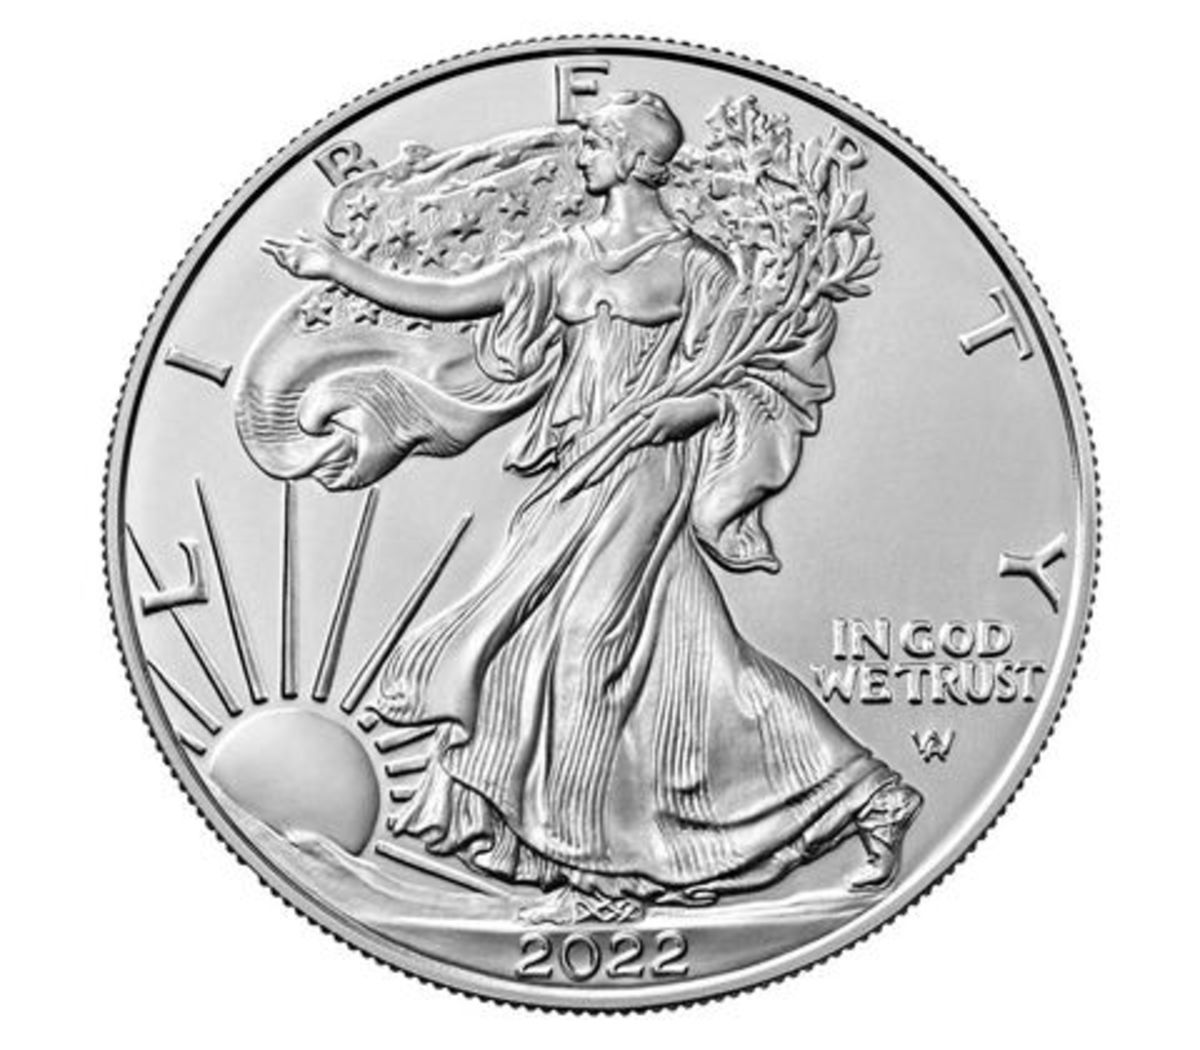 2022 uncirculated silver American Eagle. (Image courtesy United States Mint.)